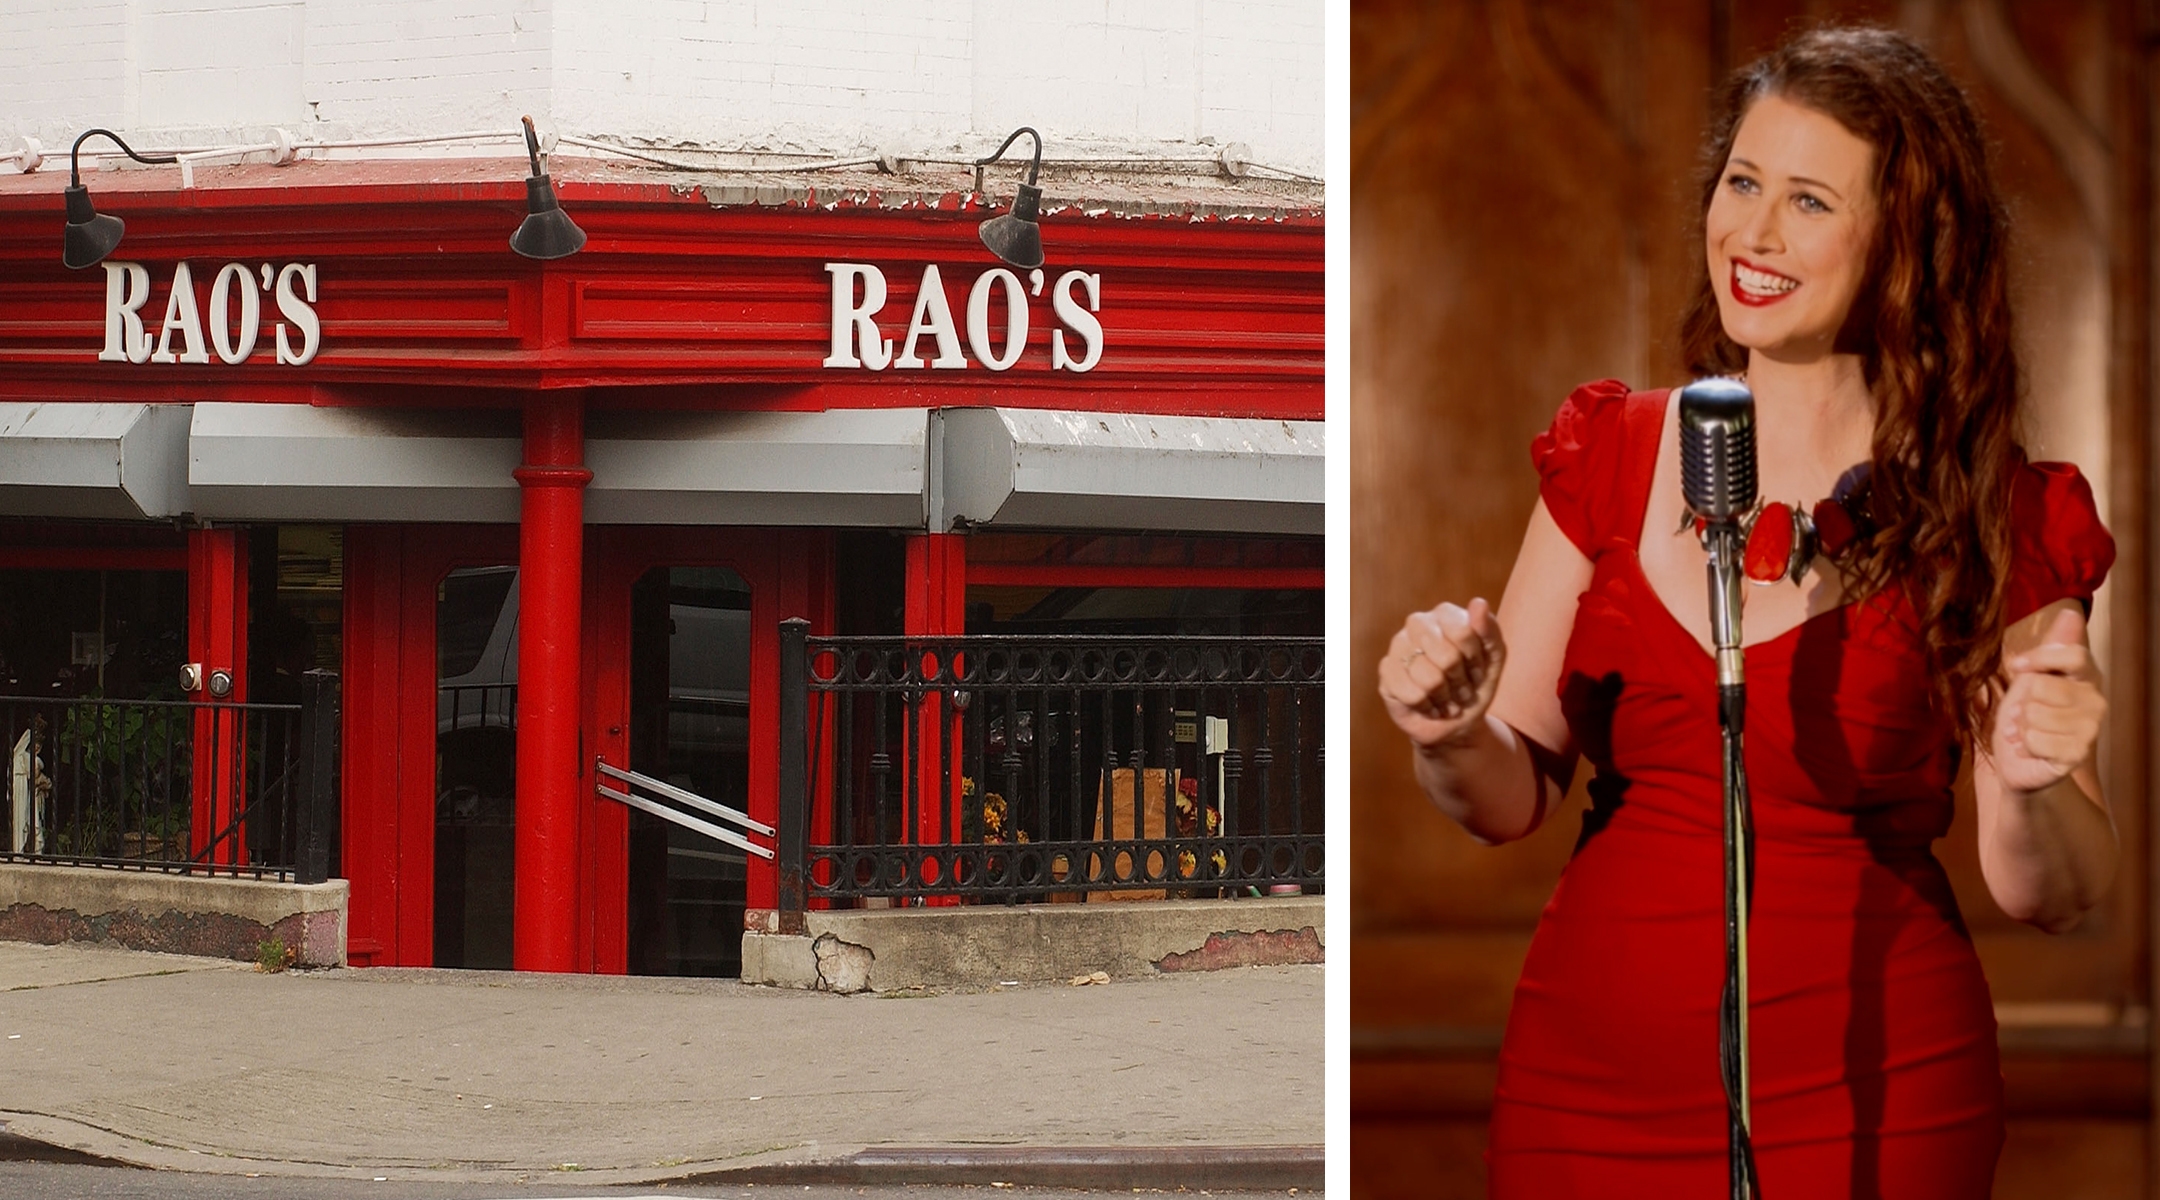 How a mob hit at Rao’s restaurant changed a Jewish actress’s life